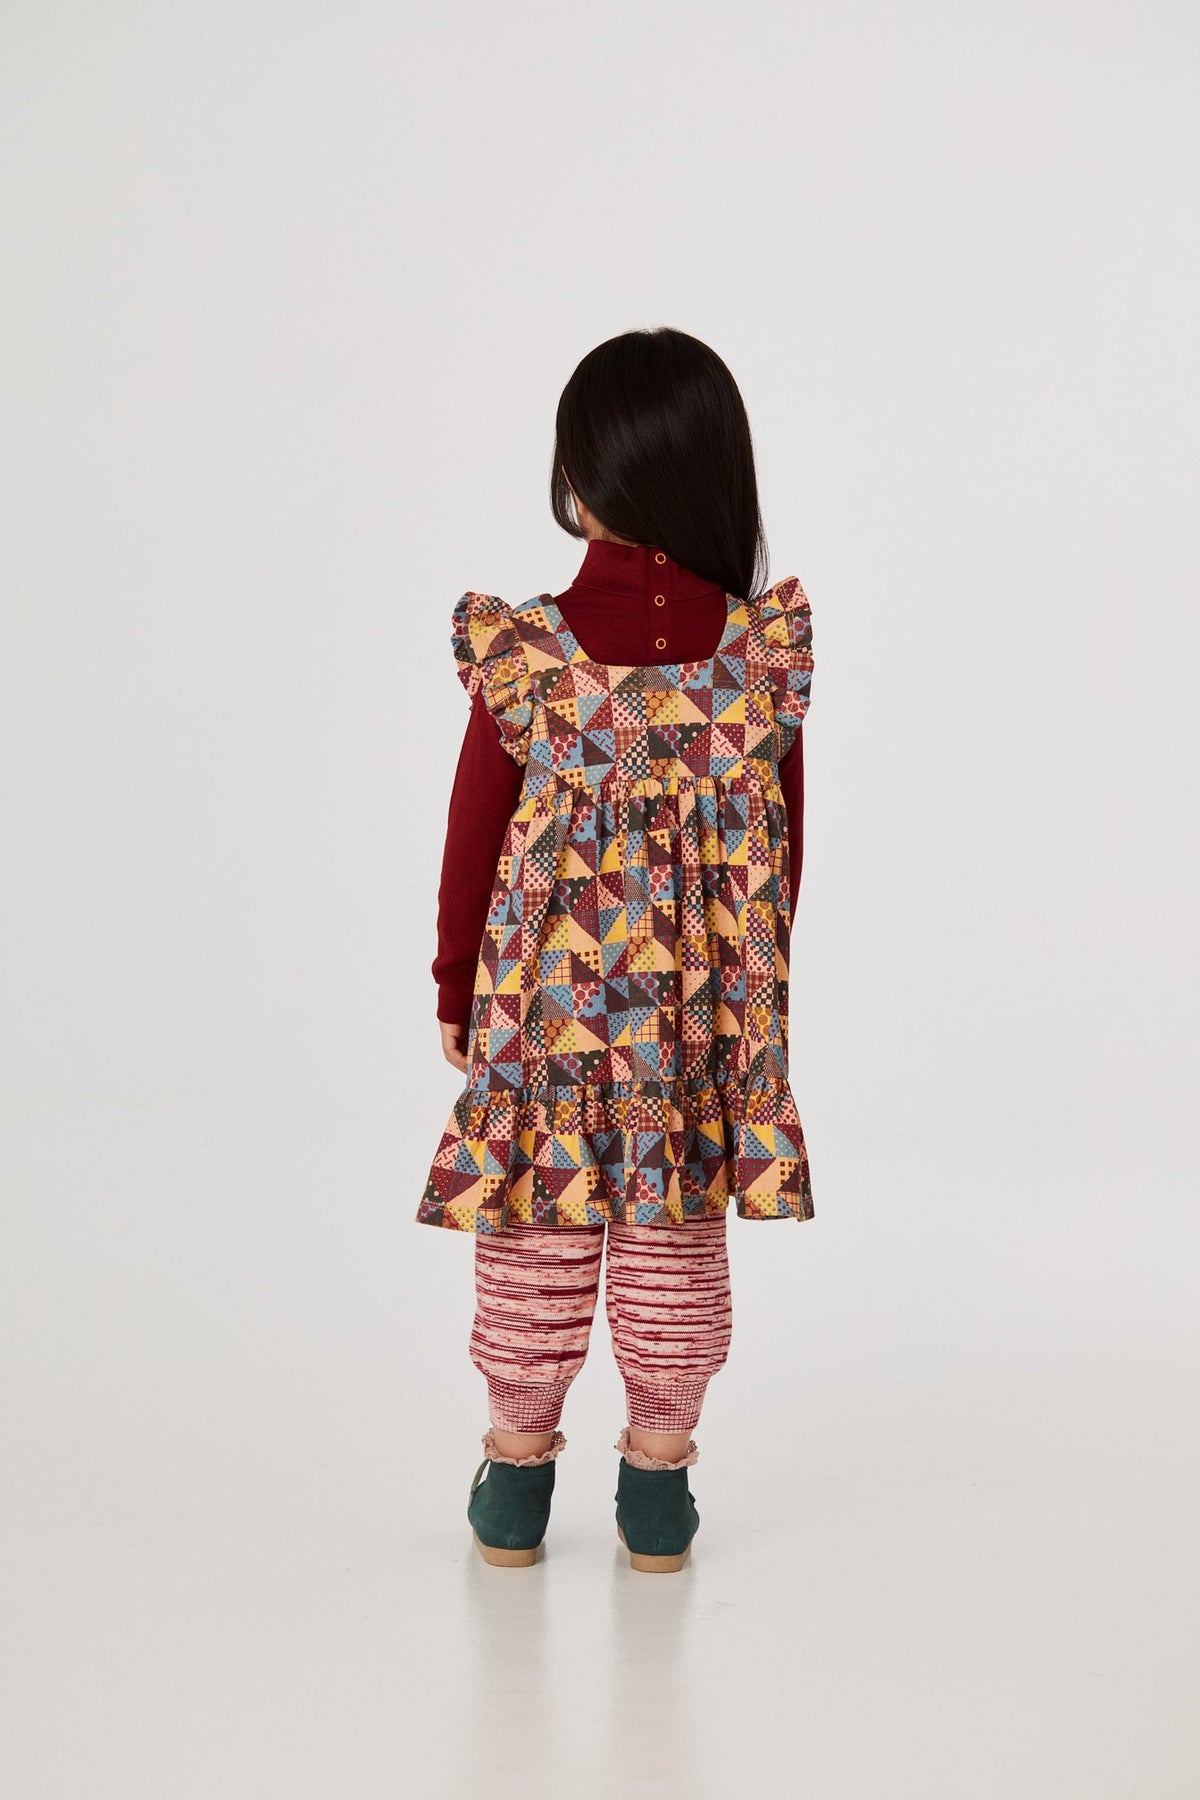 Ruffle Sleeve Dress - Mango Patchwork+Model is 41 inches tall, 38lbs, wearing a size 4-5y